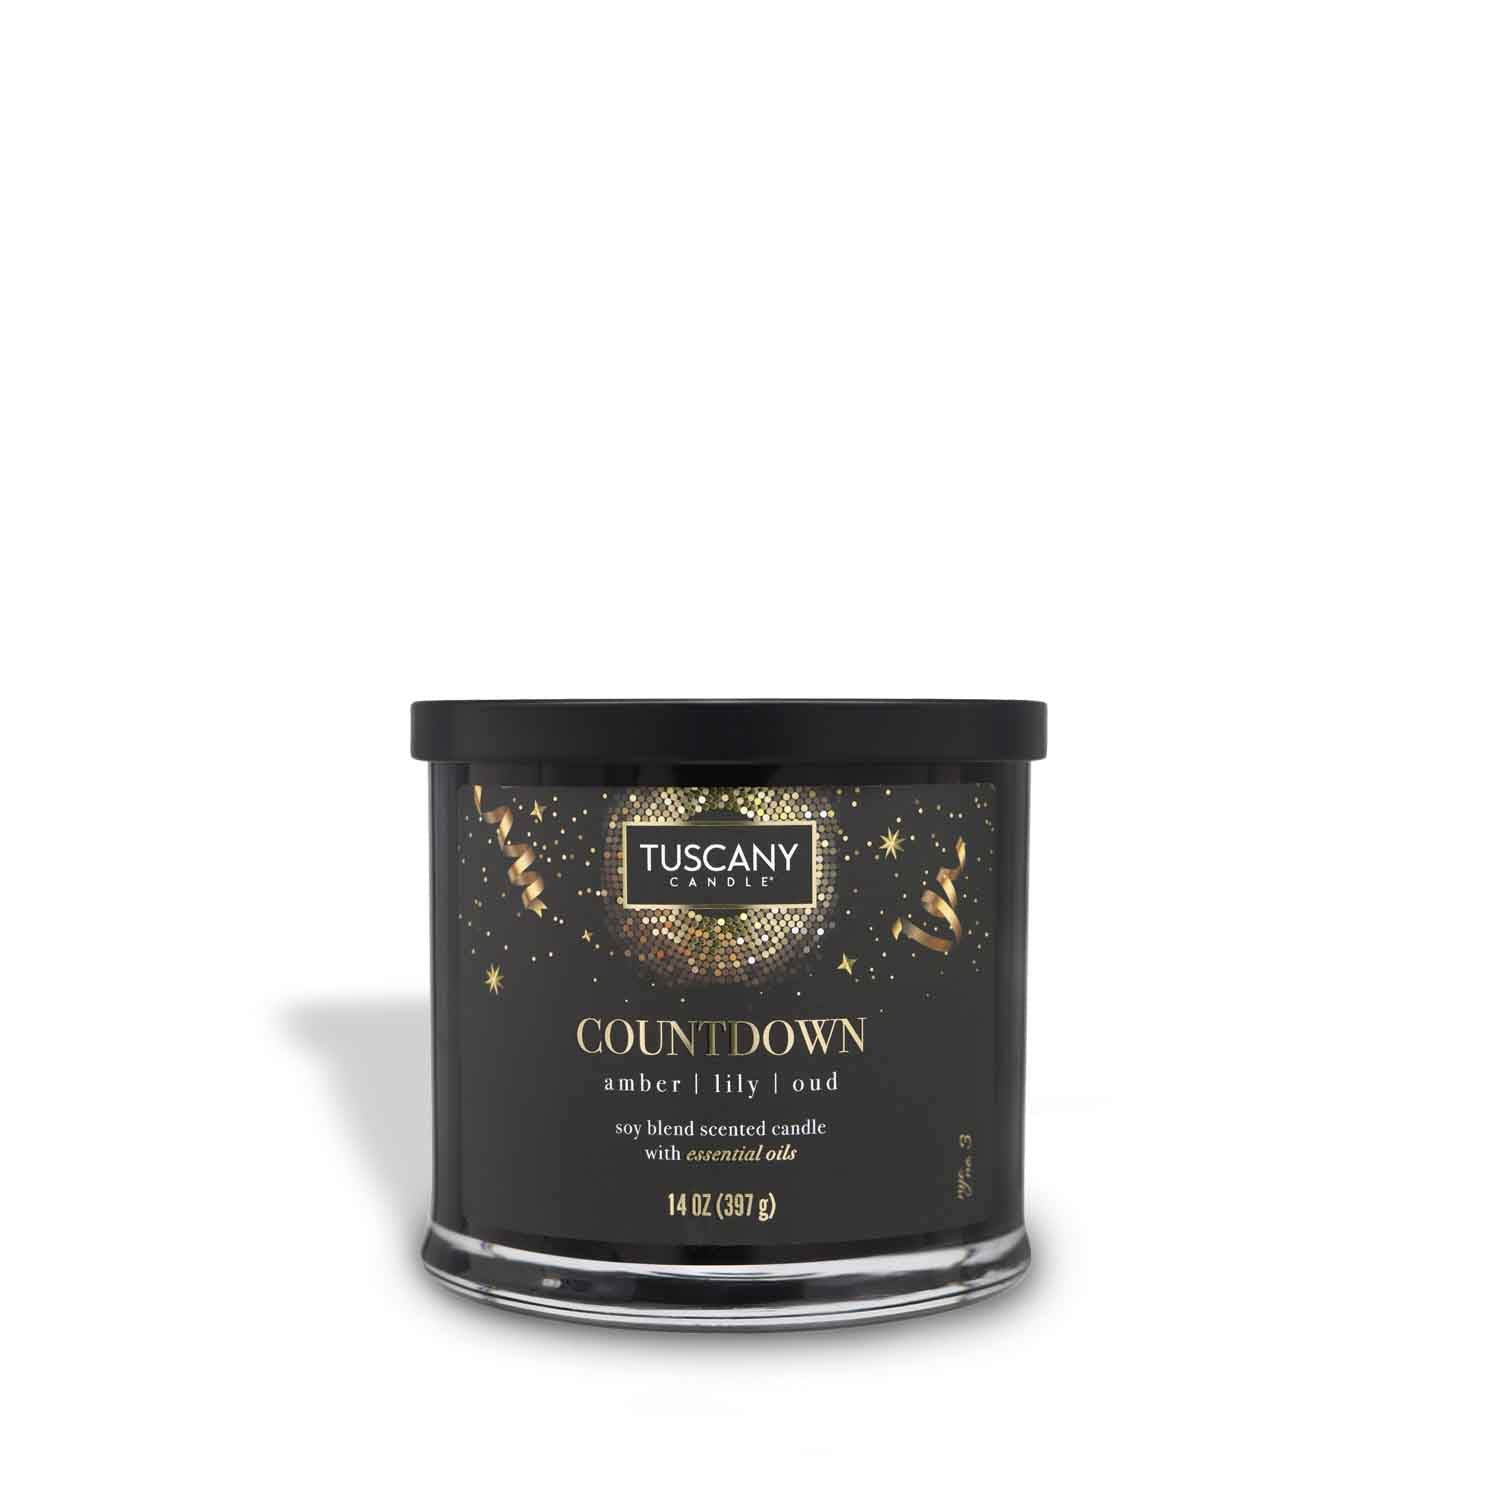 Glossy black jar housing the 'Countdown' candle, exuding scents of amber, lily, and oud, adorned with a stylish New Year's Eve-inspired label.